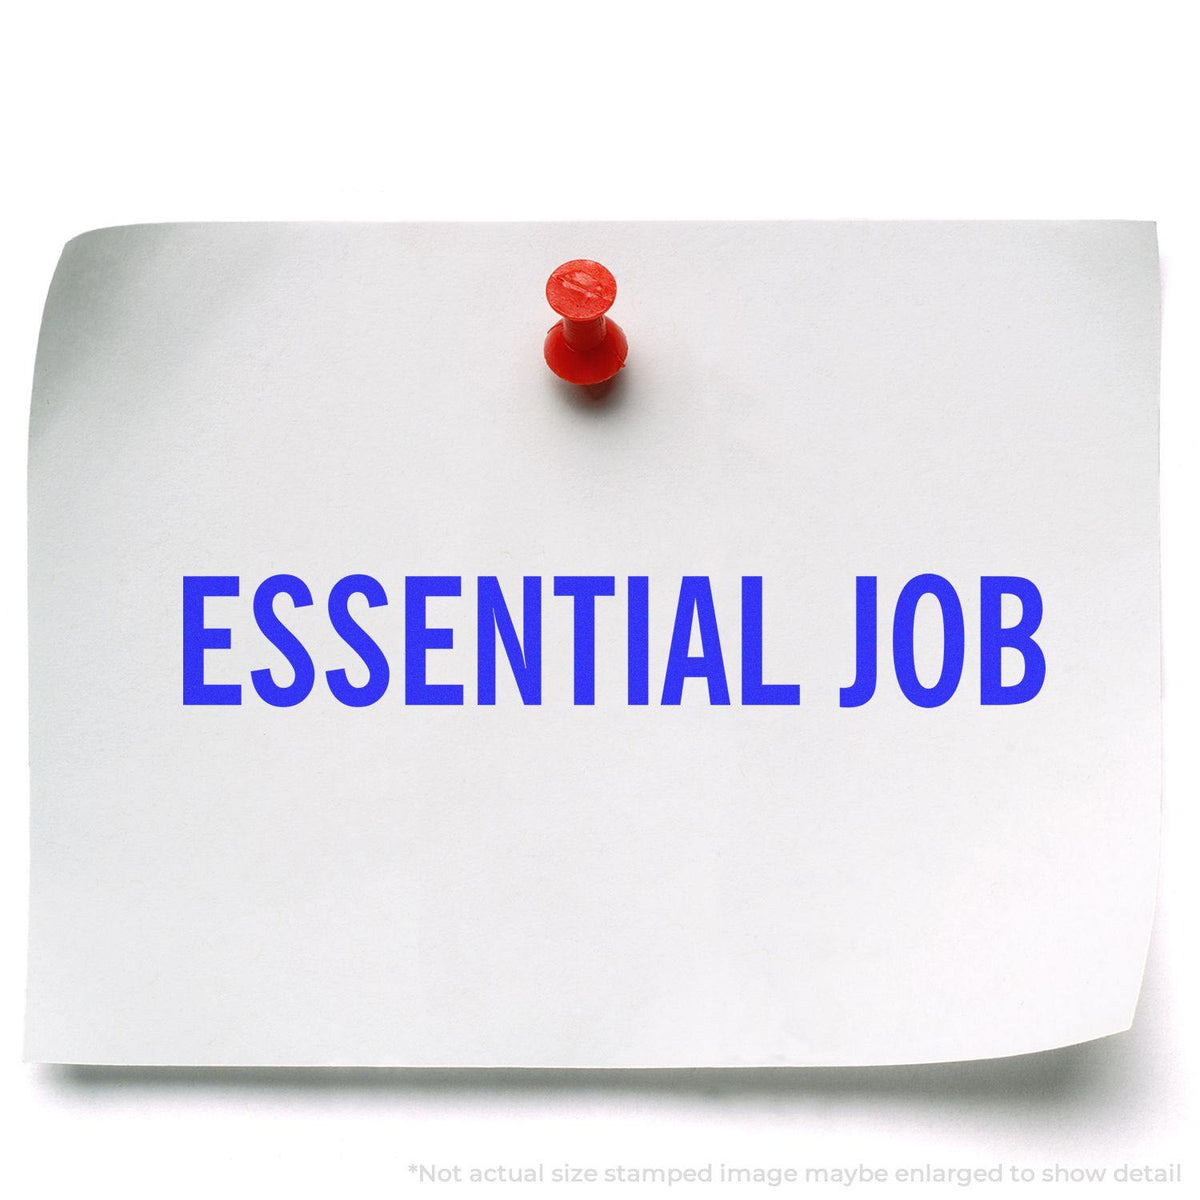 Essential Job Rubber Stamp In Use Photo